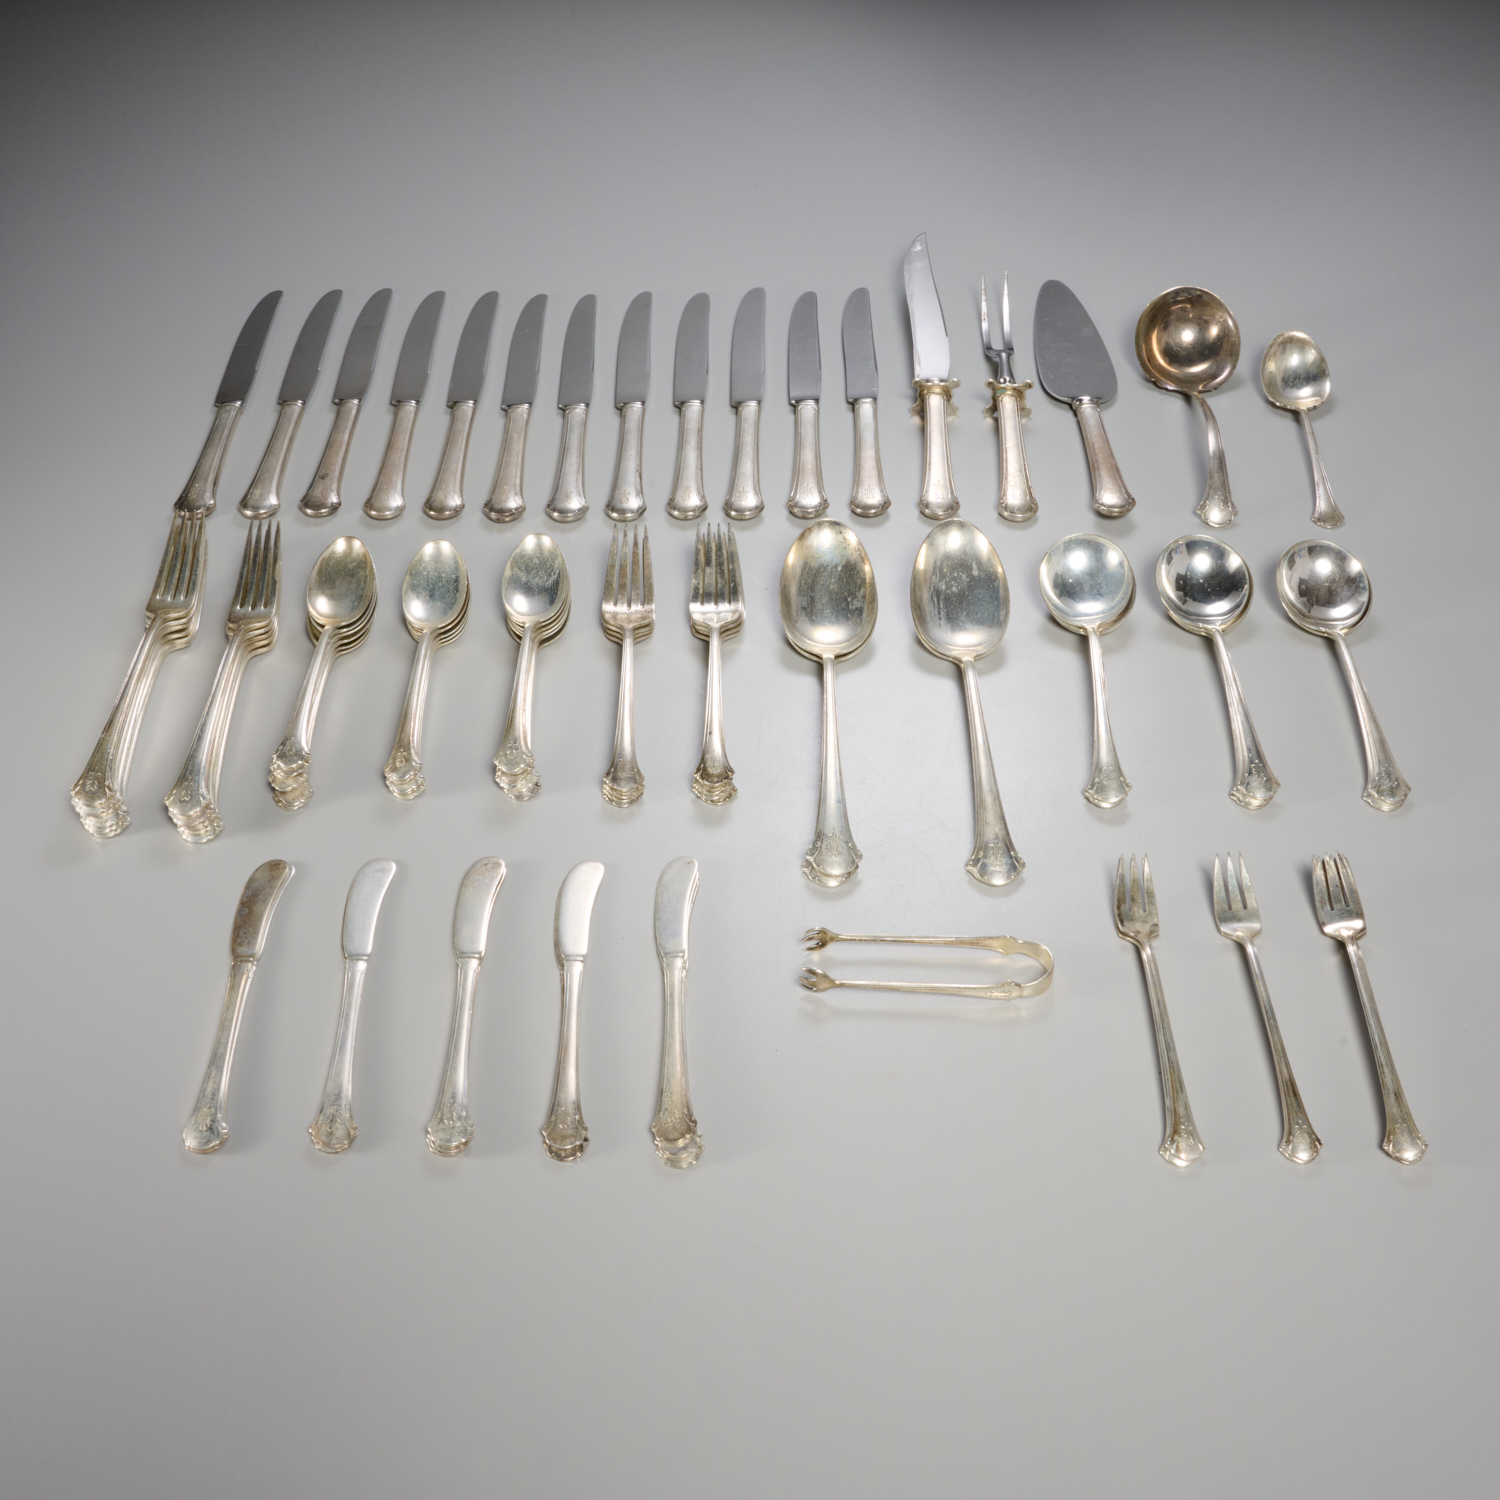 TOWLE CHIPPENDALE STERLING FLATWARE